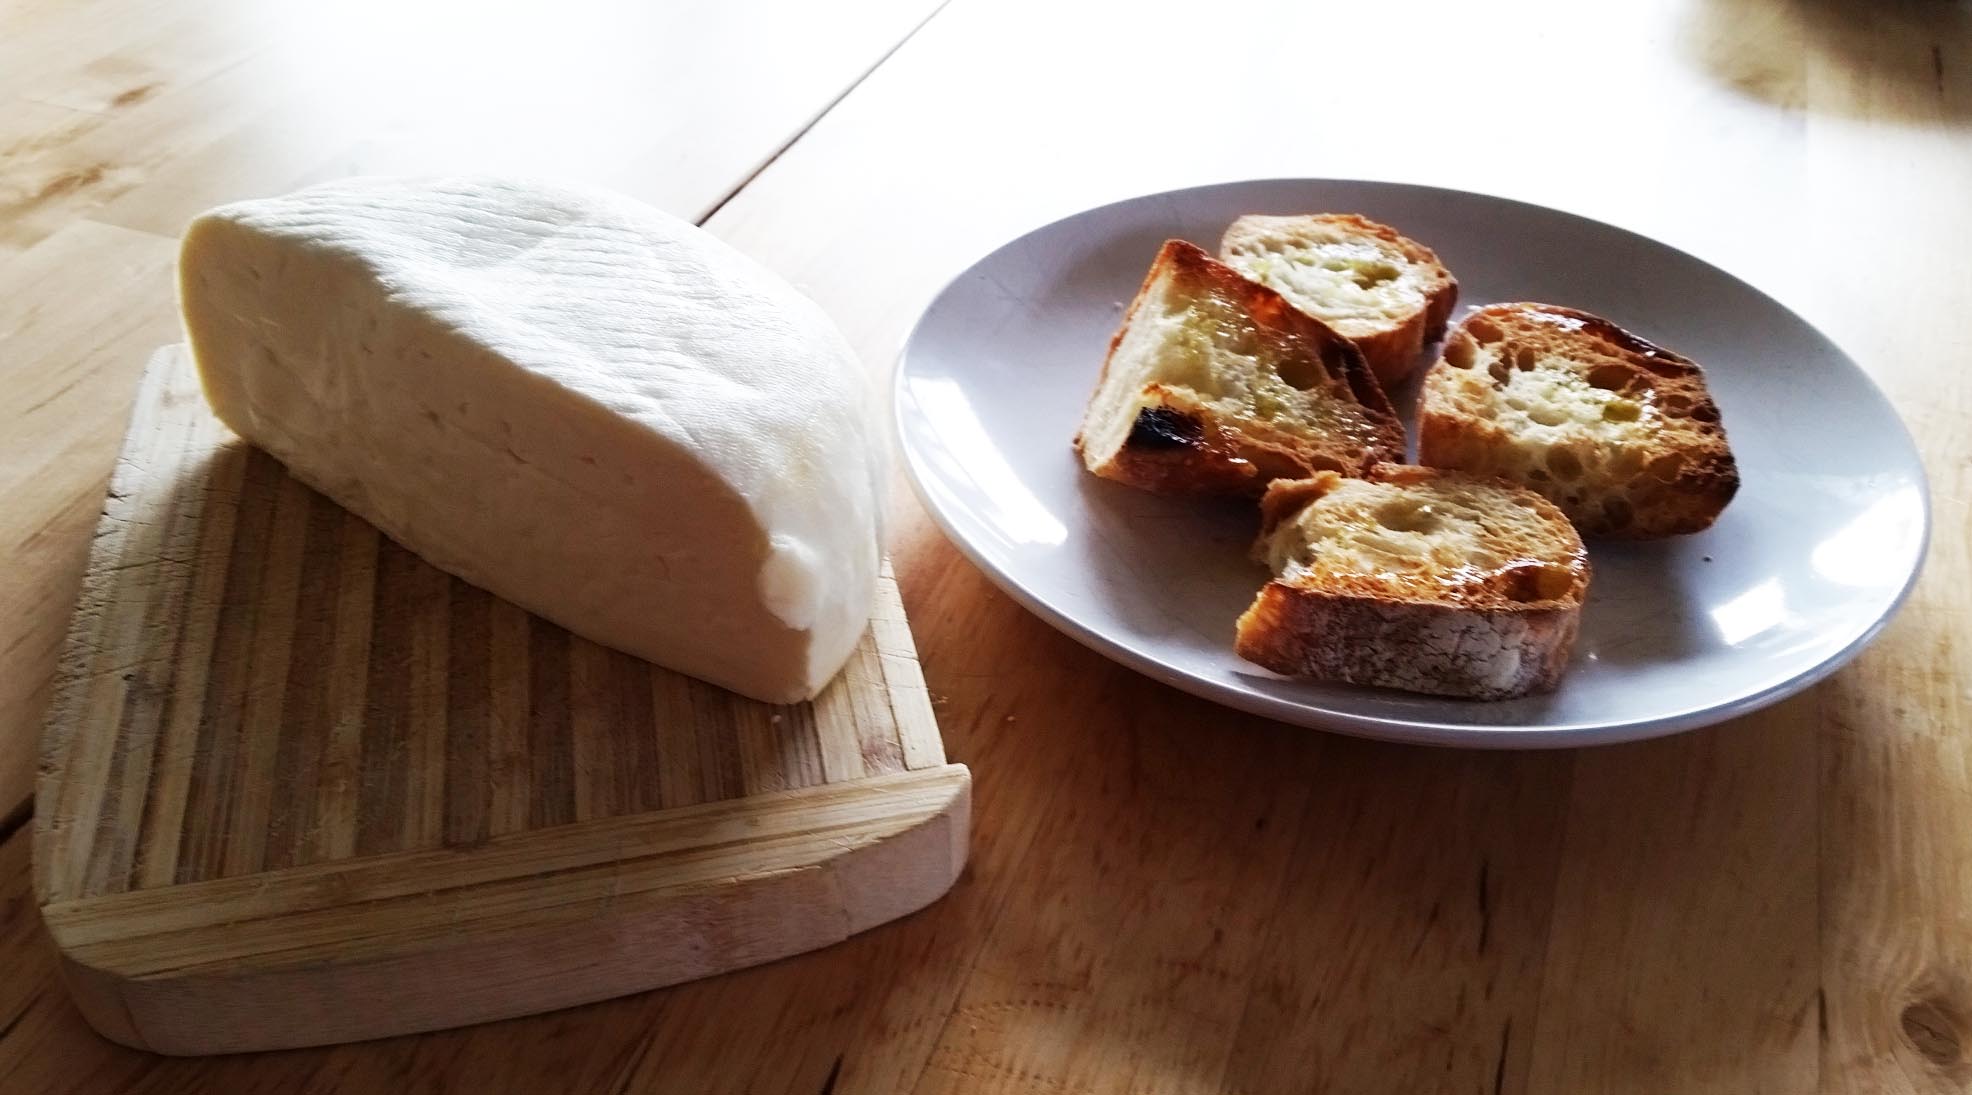 Samish Bay Cheese + toasted bread from the Breadfarm. Add 3 drops of Extra Virgin Olive Oil for perfection